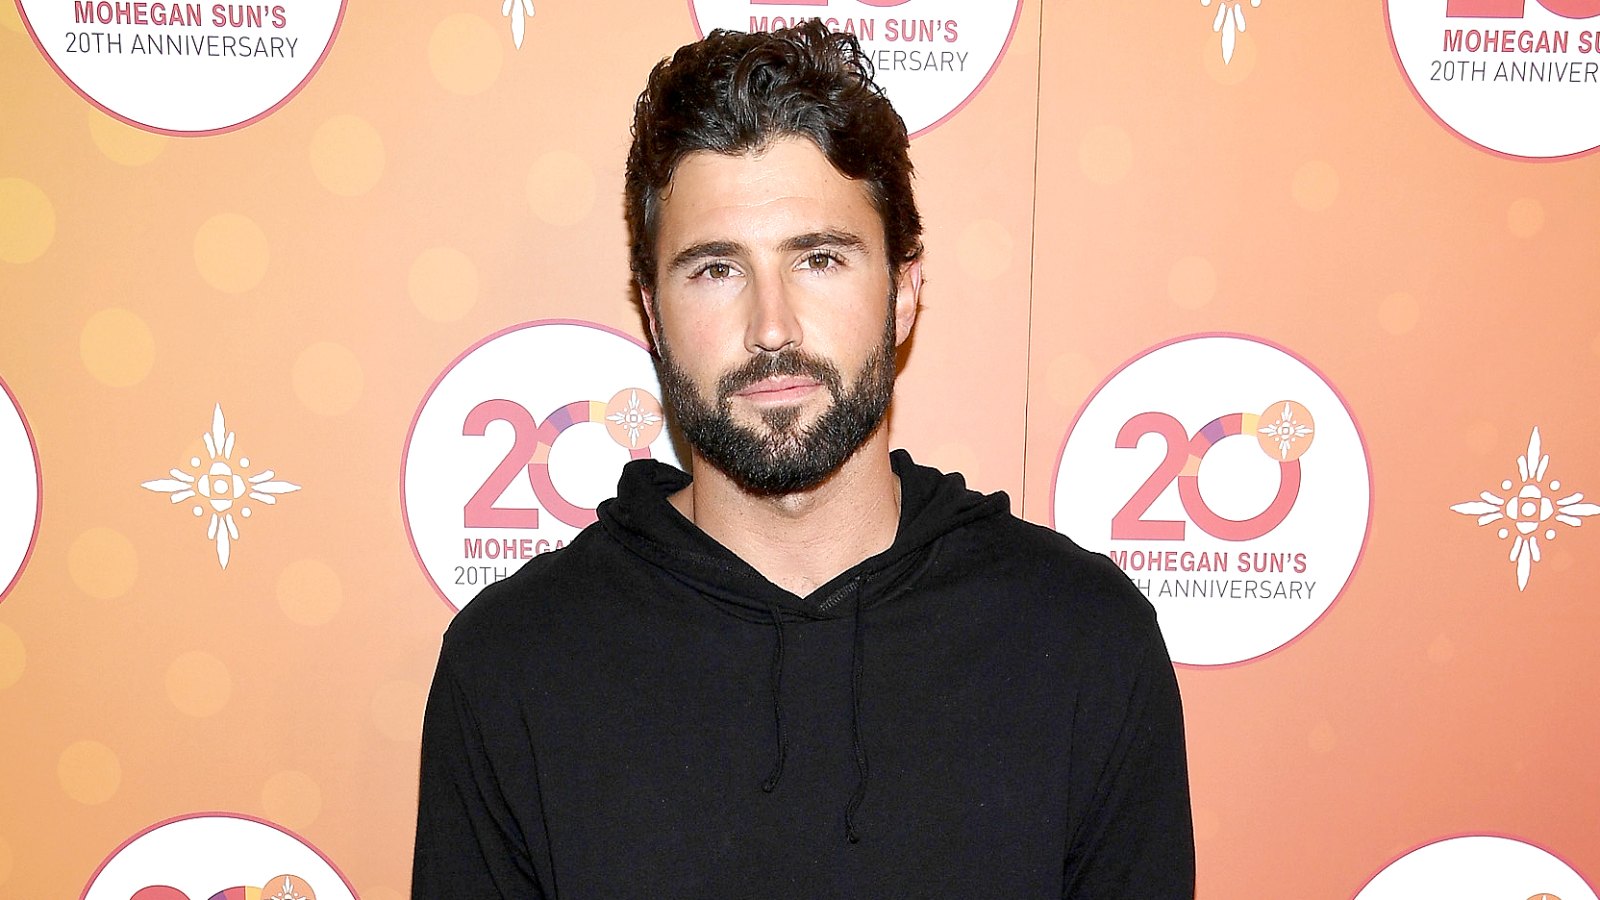 Brody Jenner walks the red carpet before the Ballroom After Party with Chrissy Teigen and LL Cool J for Mohegan Suns 20th Anniversary at Mohegan Sun on October 15, 2016 in Uncasville, Connecticut.